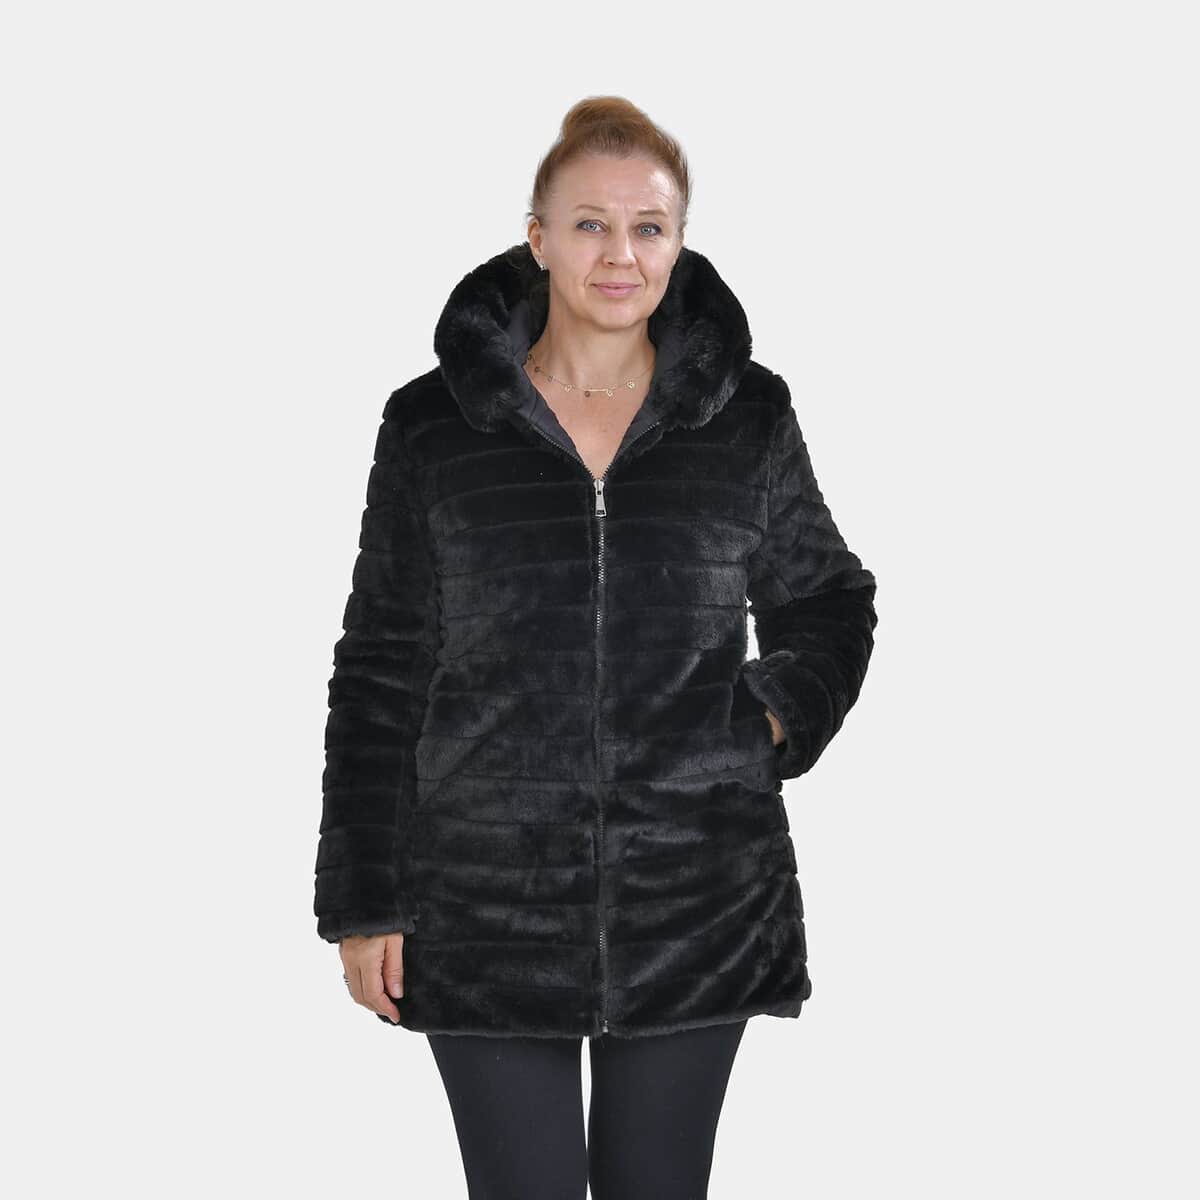 Tamsy Black Reversible Faux Fur and Puffer Jacket with Hood - L image number 5